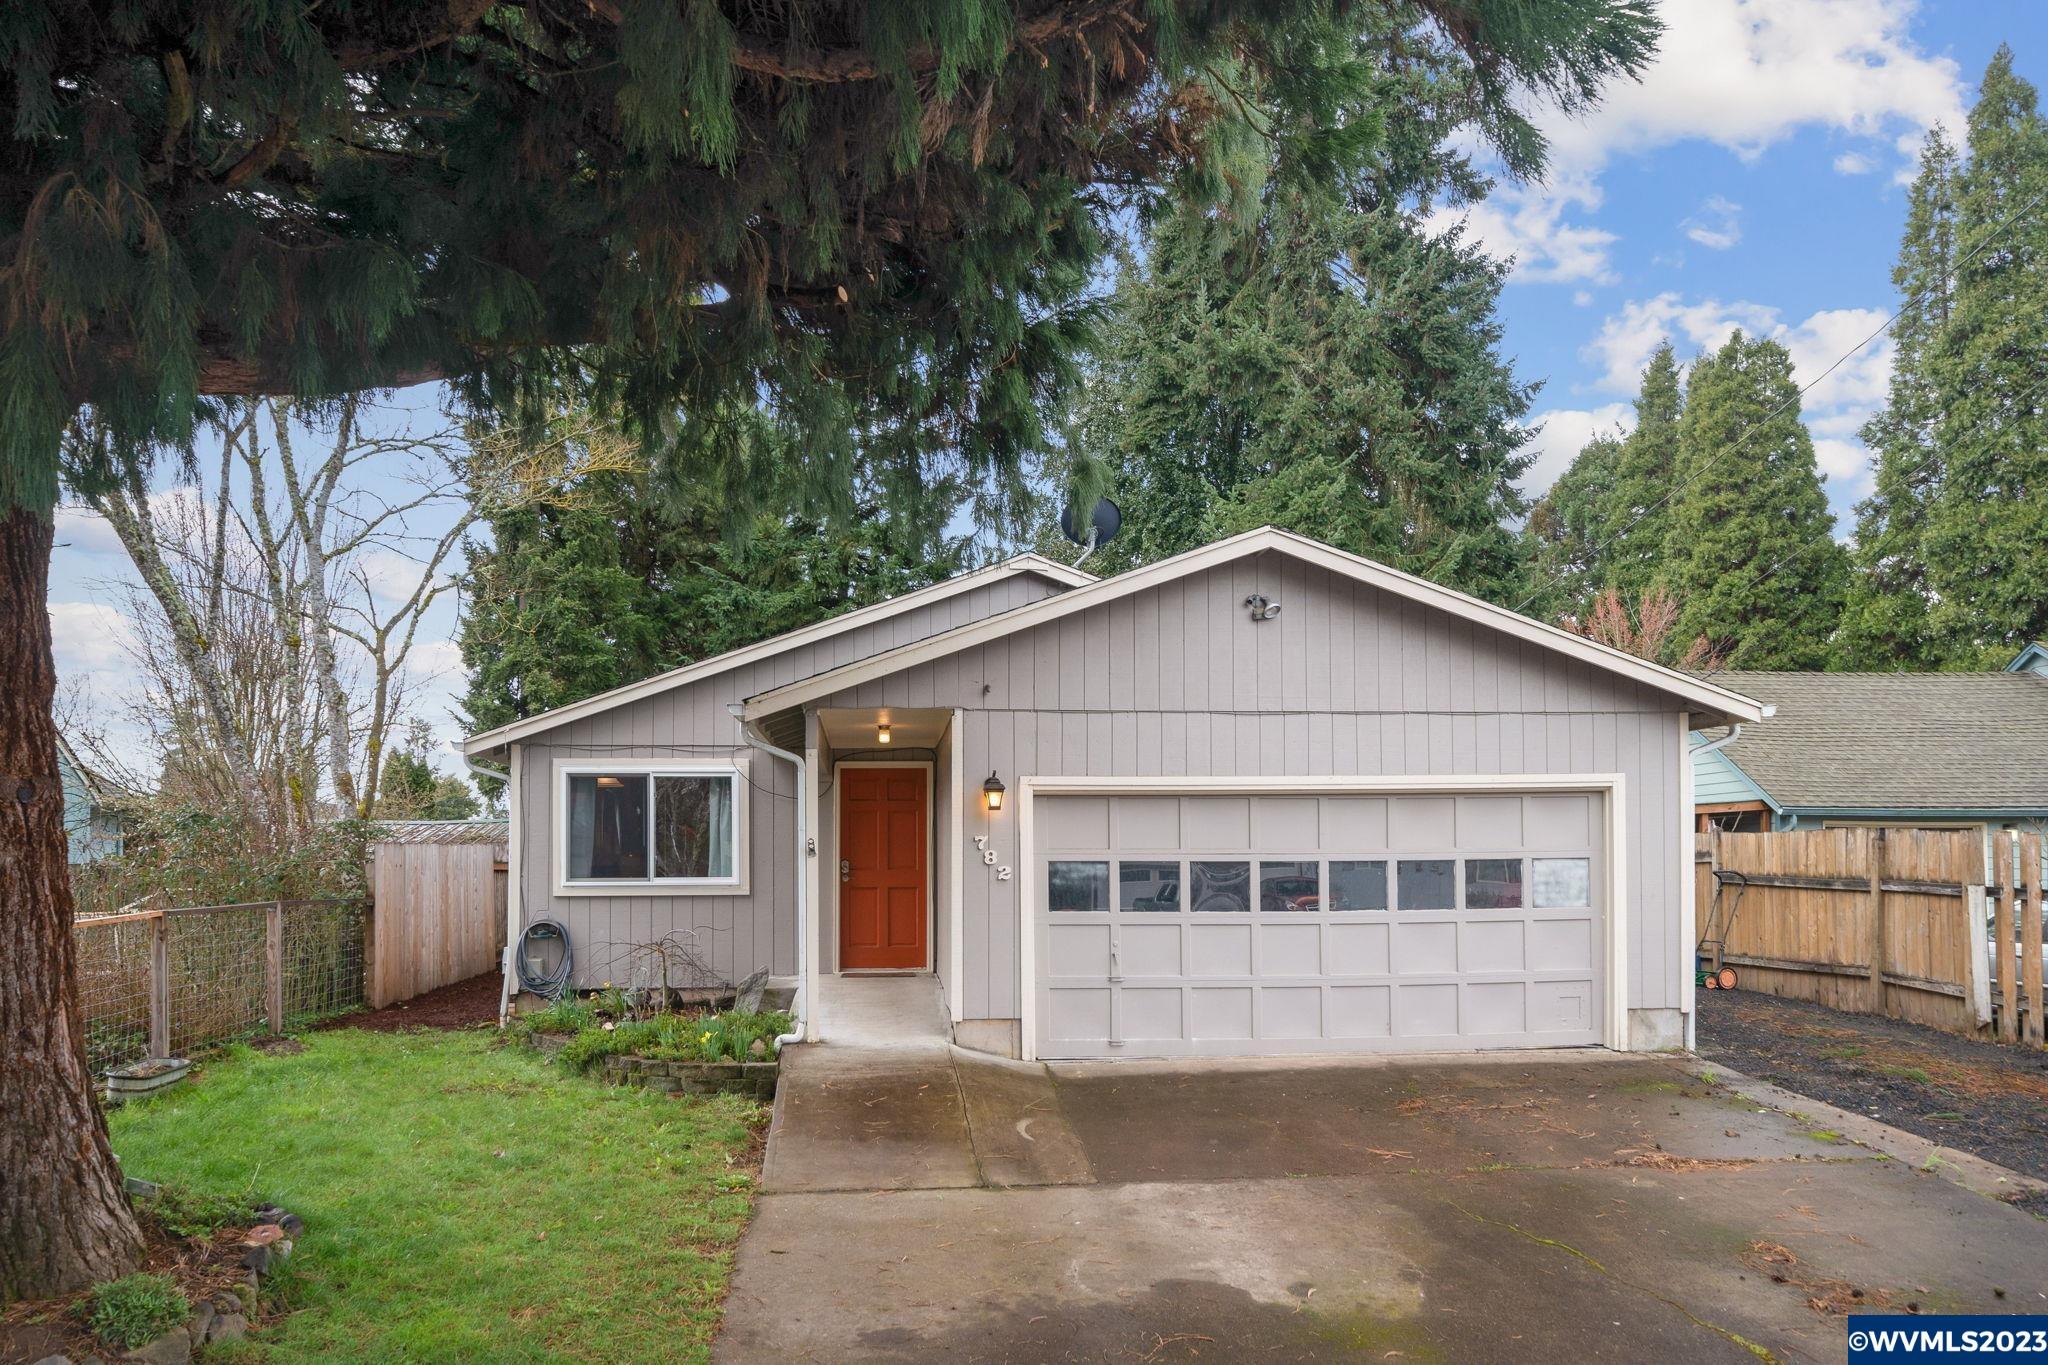 Charming 3 bed, 2 bath home w/ 1270 sqft is move in ready. Lrg rooms w/ lots of natural light, LVP floors t/o & tile in the updated bathrooms. Open kitchen w/ gas range & DR w/ sliding glass door help bring the outdoors in! 2 car garage w/ parking for 3 cars + 1 on street & room for small camper on side of house. Only 1/2 mile from Willamette Park & river. 10 min drive to OSU, Reser & Gill Stadiums, downtown, pub. bus stop 1/2 blk away. Fenced backyard w/ patio & firepit. Great investment property also!